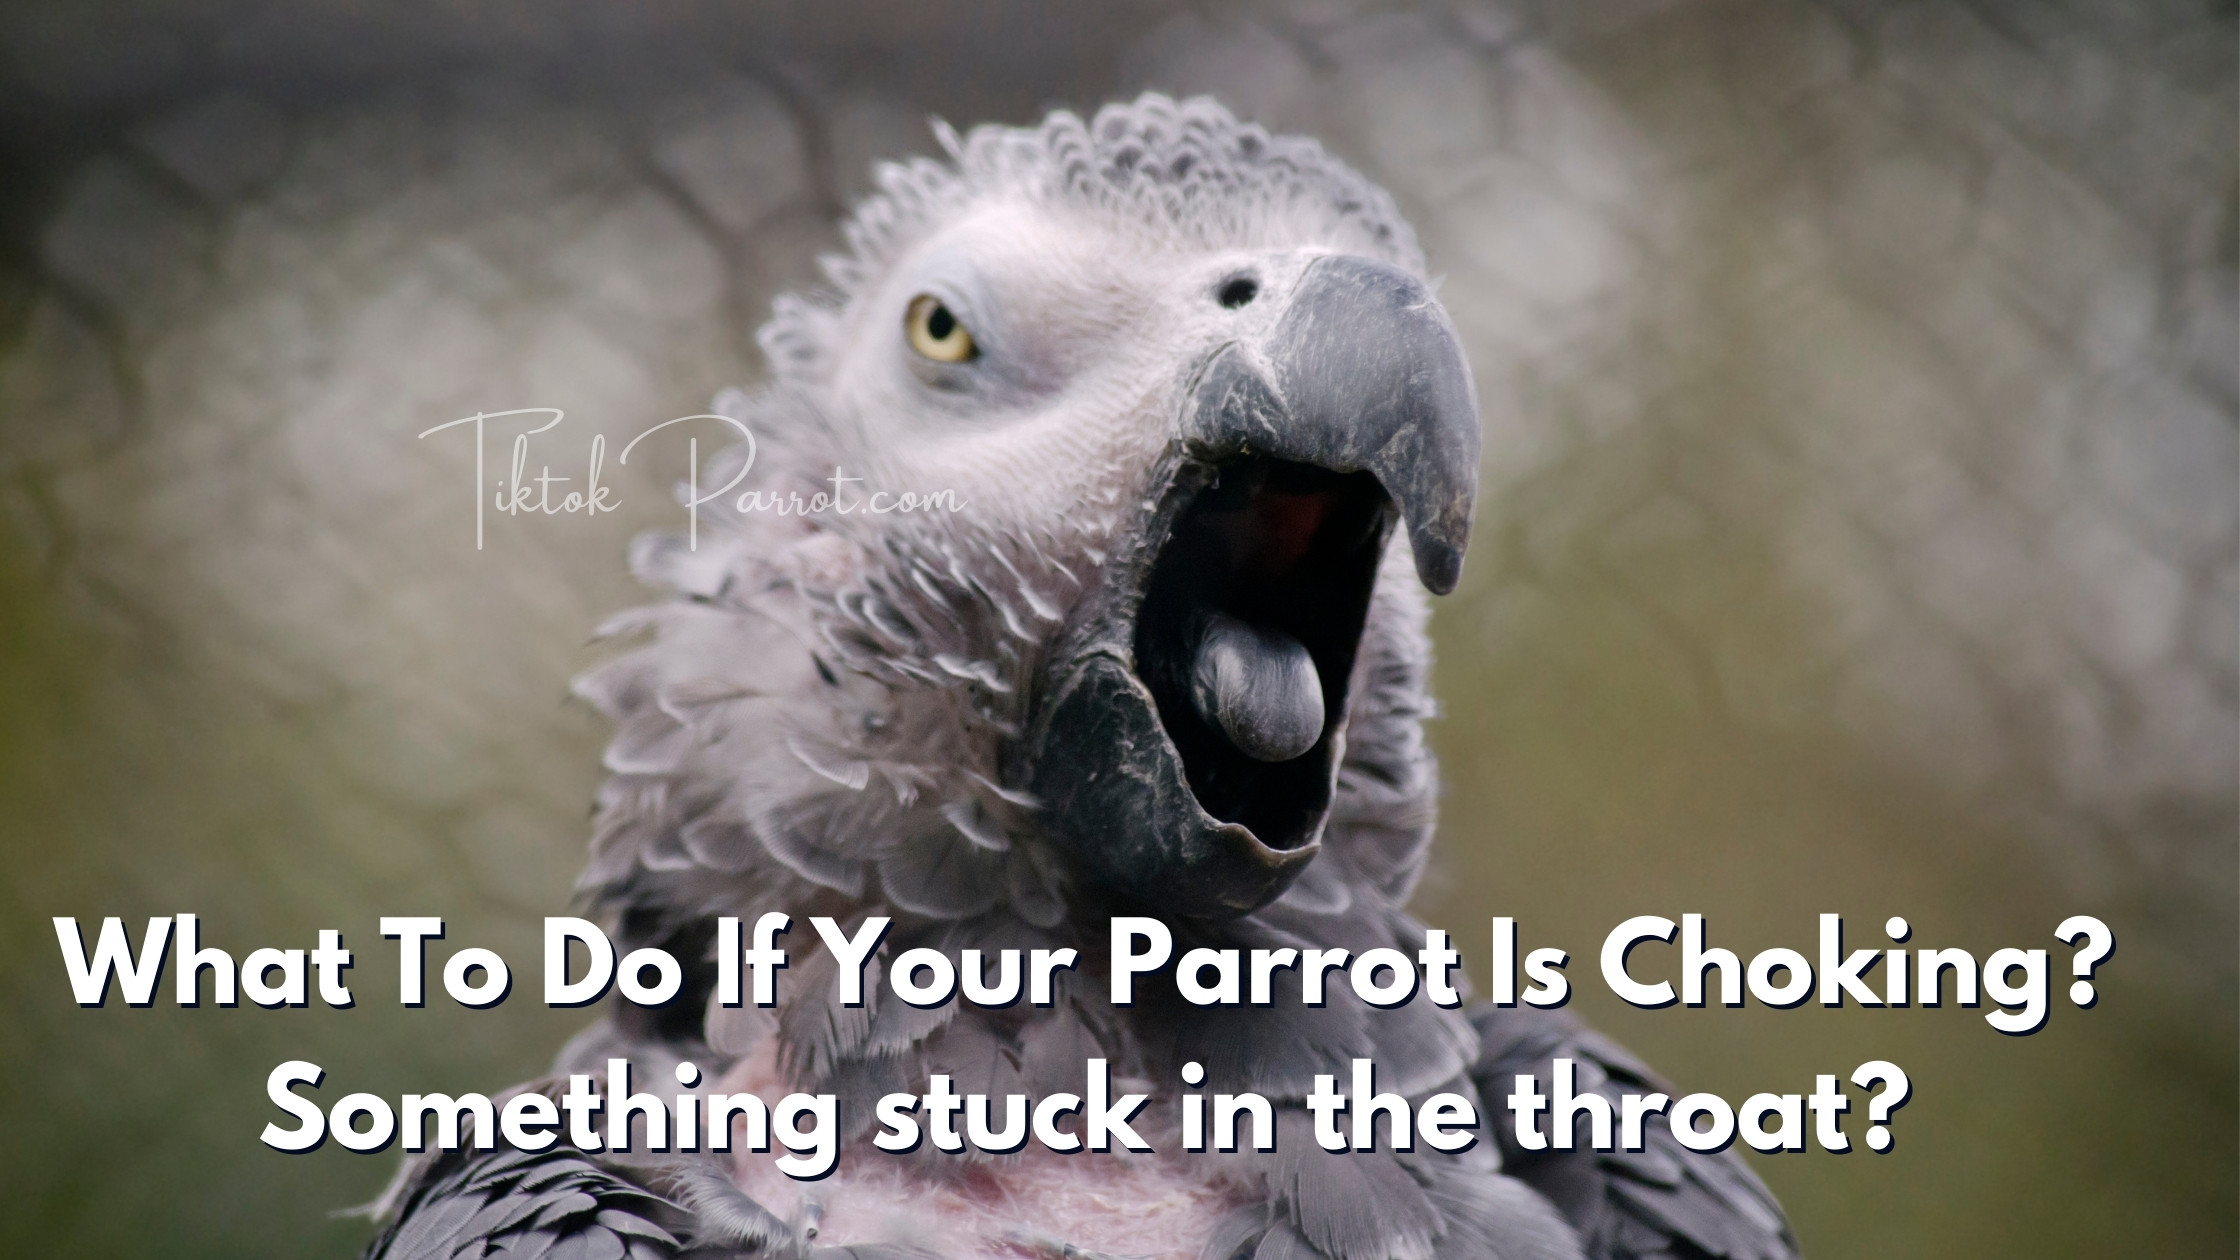 What To Do If Your Parrot Is Choking, something stuck in the throat?